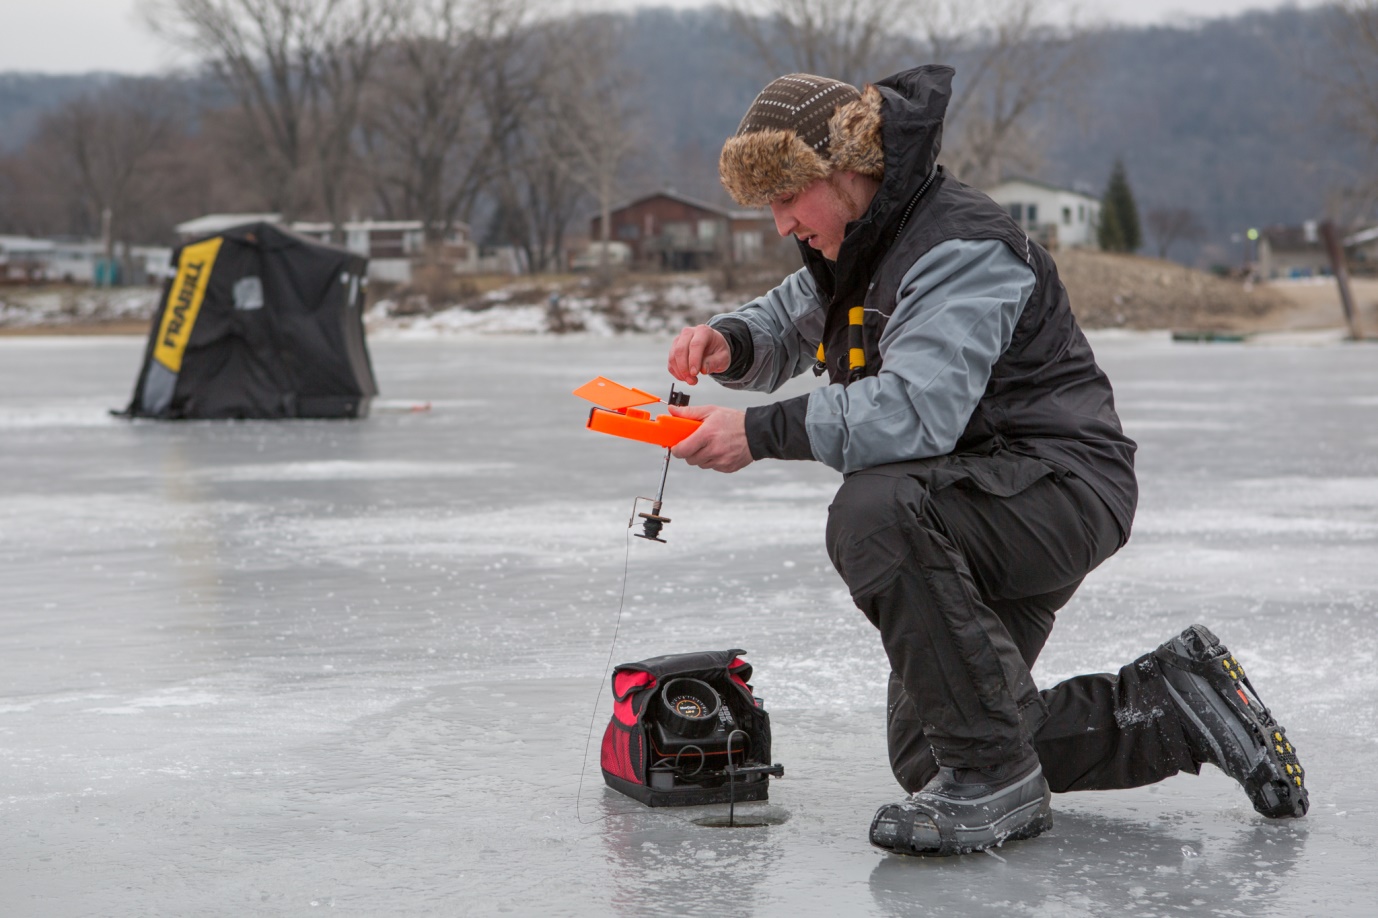 Ice Fishing Finder & Flasher For Your Winter Season 2018